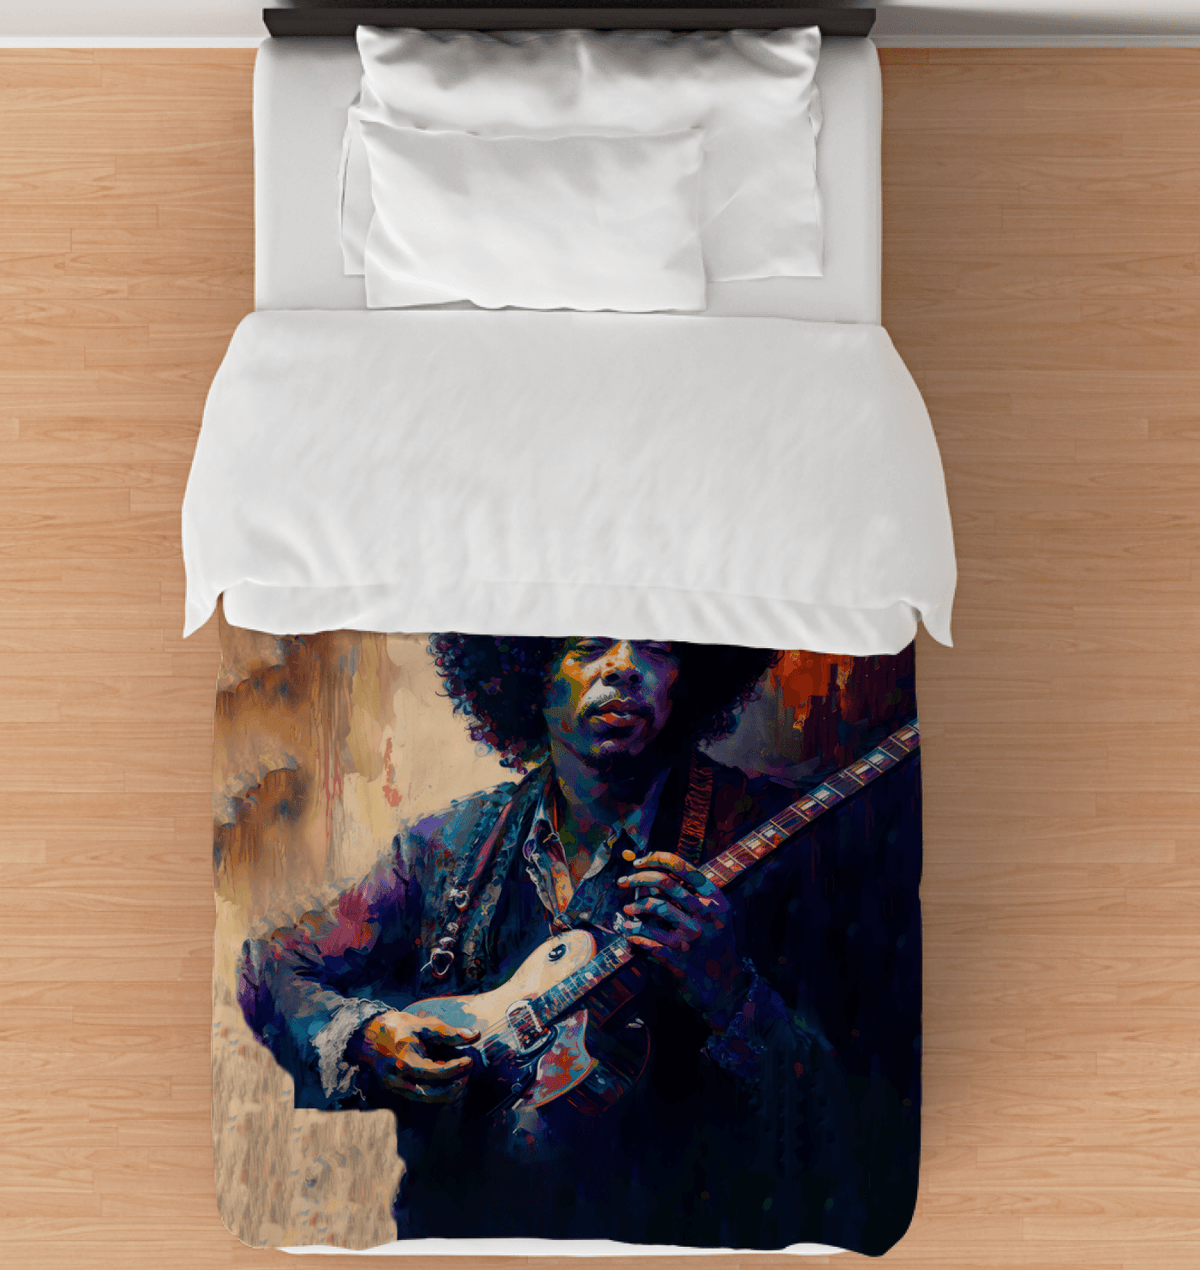 Orchestra of Dreams Comforter - Beyond T-shirts